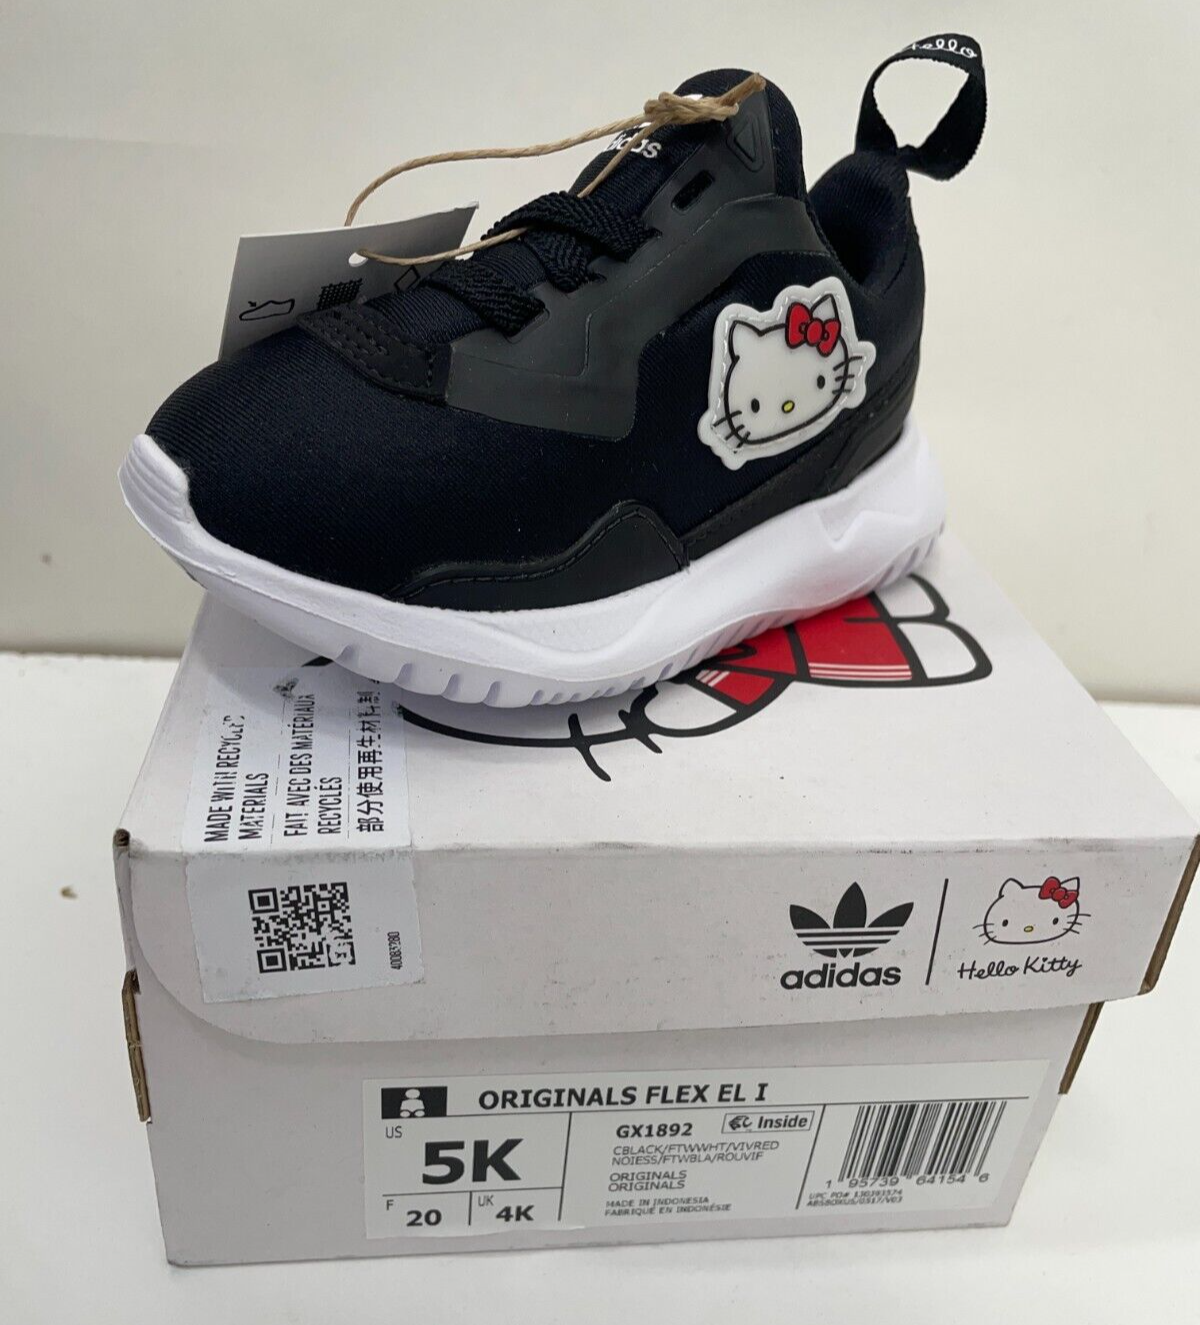 Adidas Toddlers 5K Hello Kitty Originals Flex Shoes Sneaker Black Lace Up GX1892